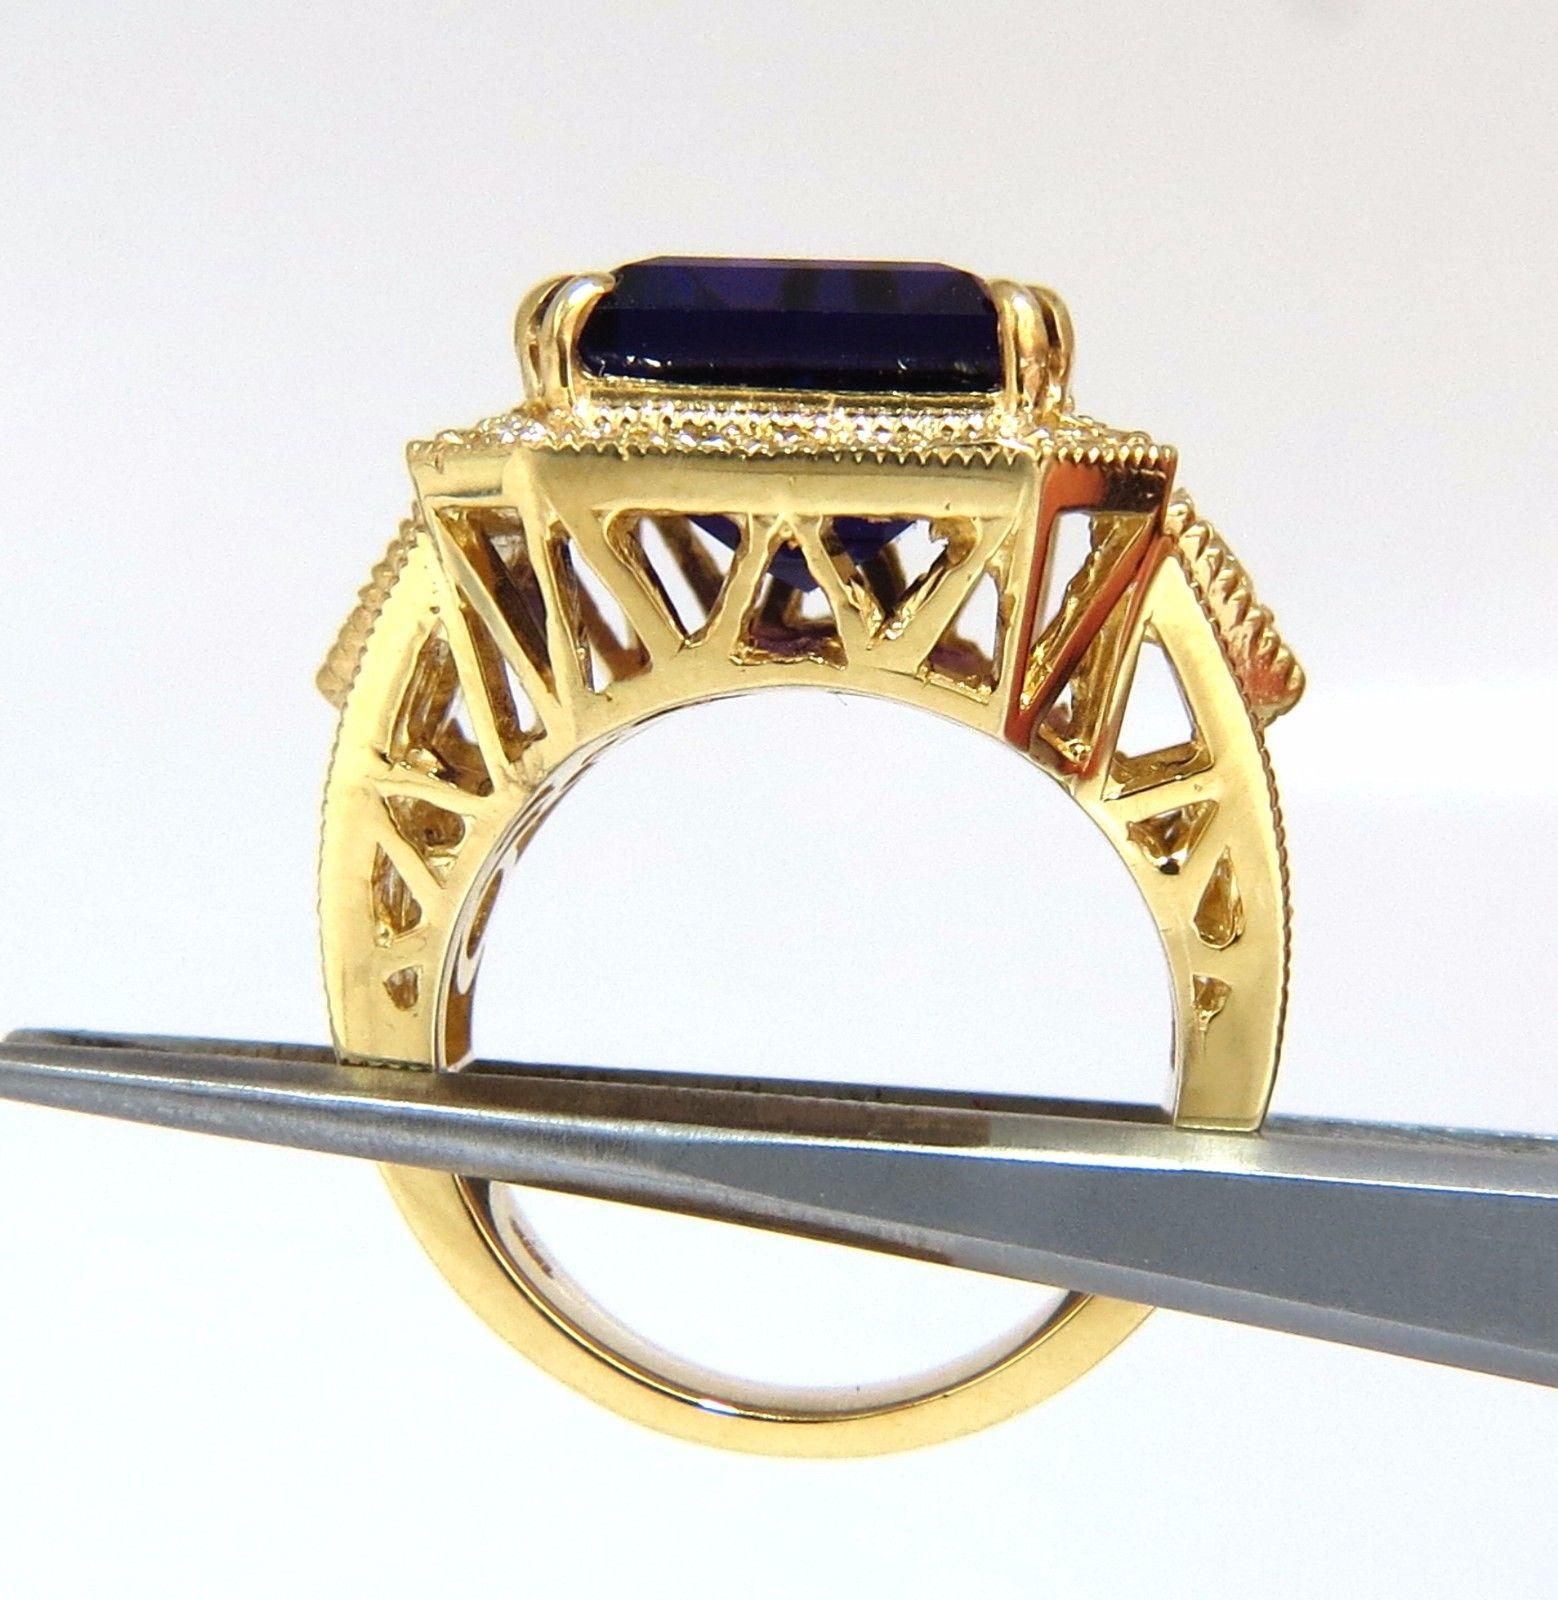 Purple Flash.

9.39ct. Natural Amethyst ring

Emerald cut, Full cut Brilliant

14 X 12mm 

Clean Clarity & Transparent

The Prime Purple Velvet Color

1.70ct natural round diamonds.

Fancy Yellow color Vs-2 clarity.

  14kt. yellow gold

Deck of